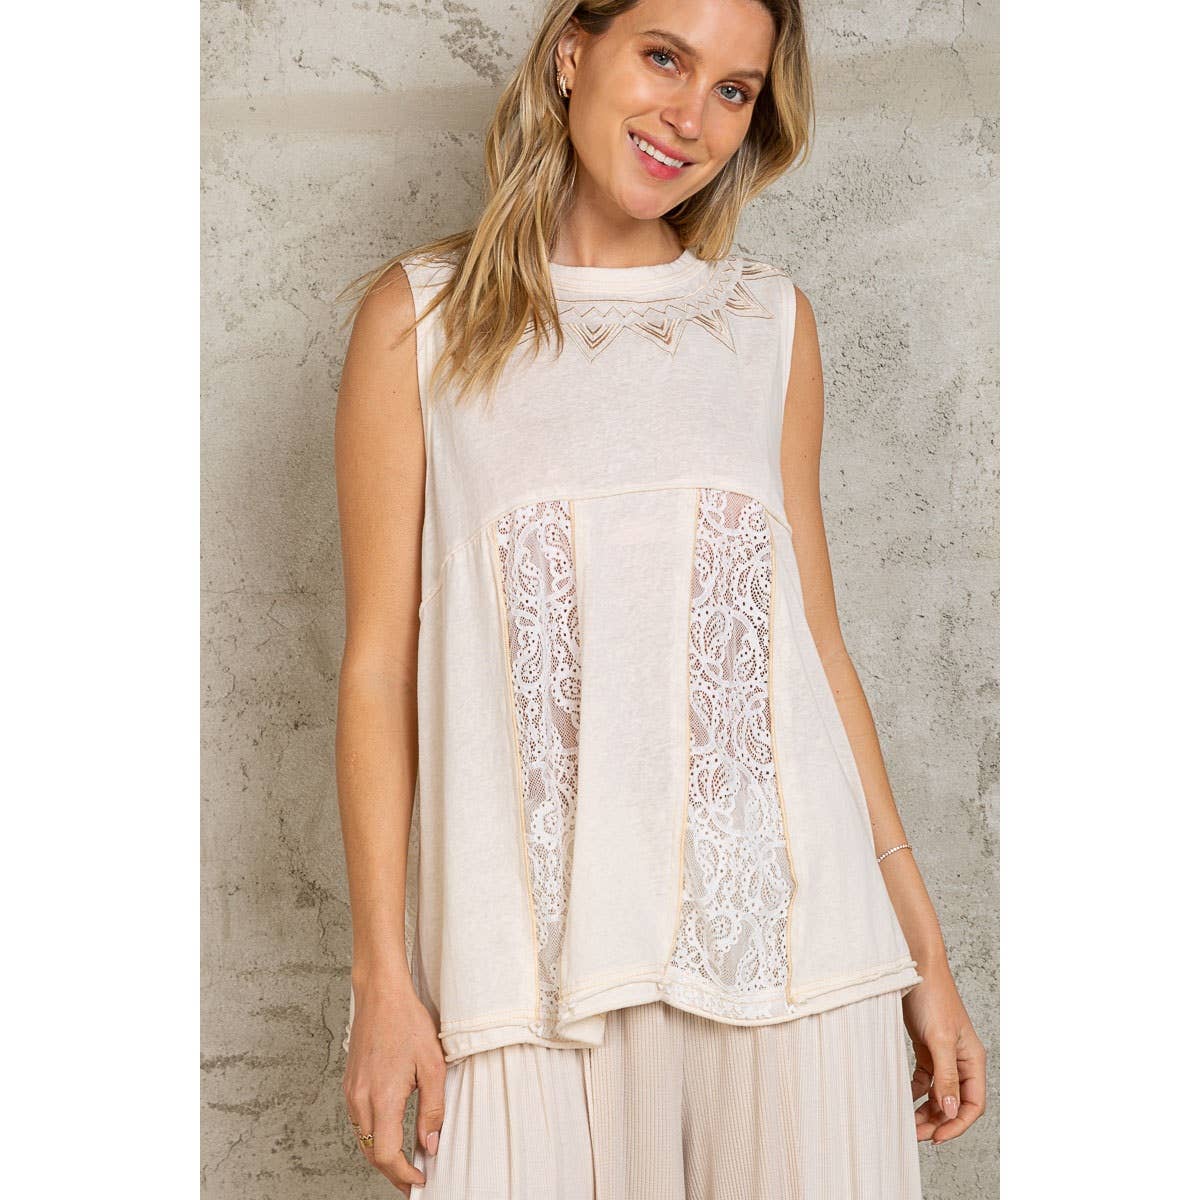 Sleeveless embroidered top